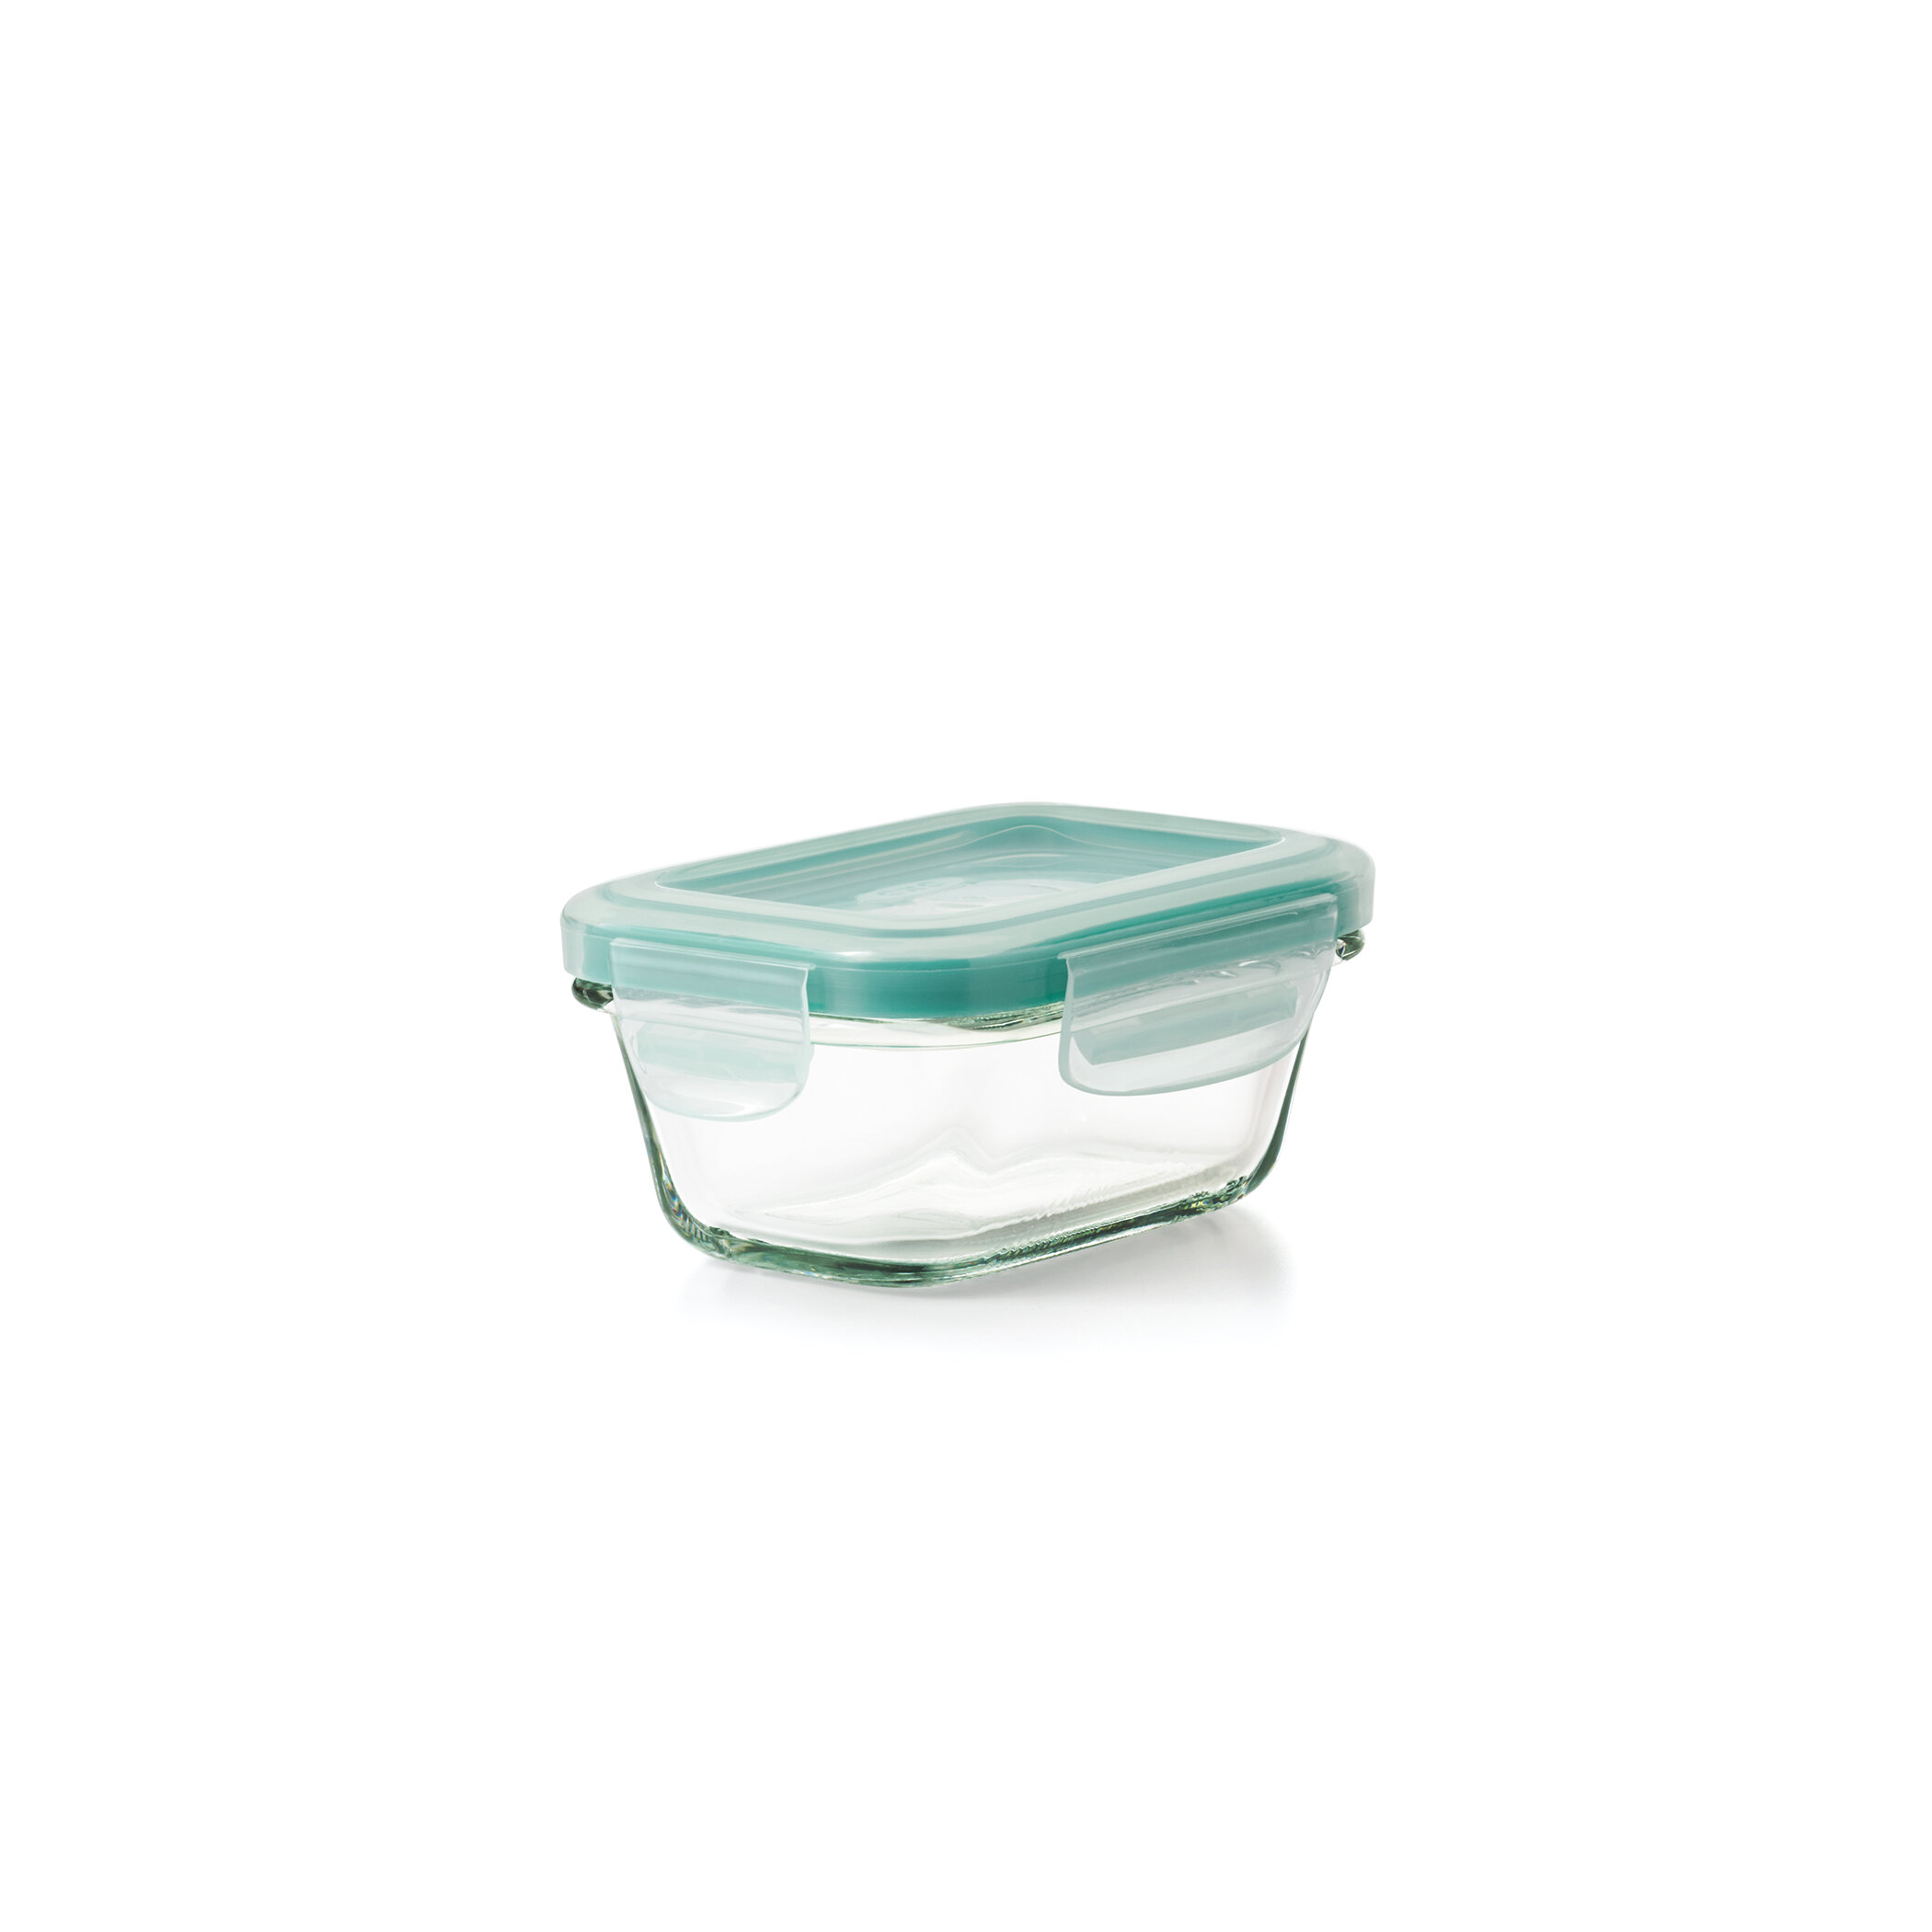 OXO Good Grips Smart Seal 12-piece Glass Food Storage Container Set